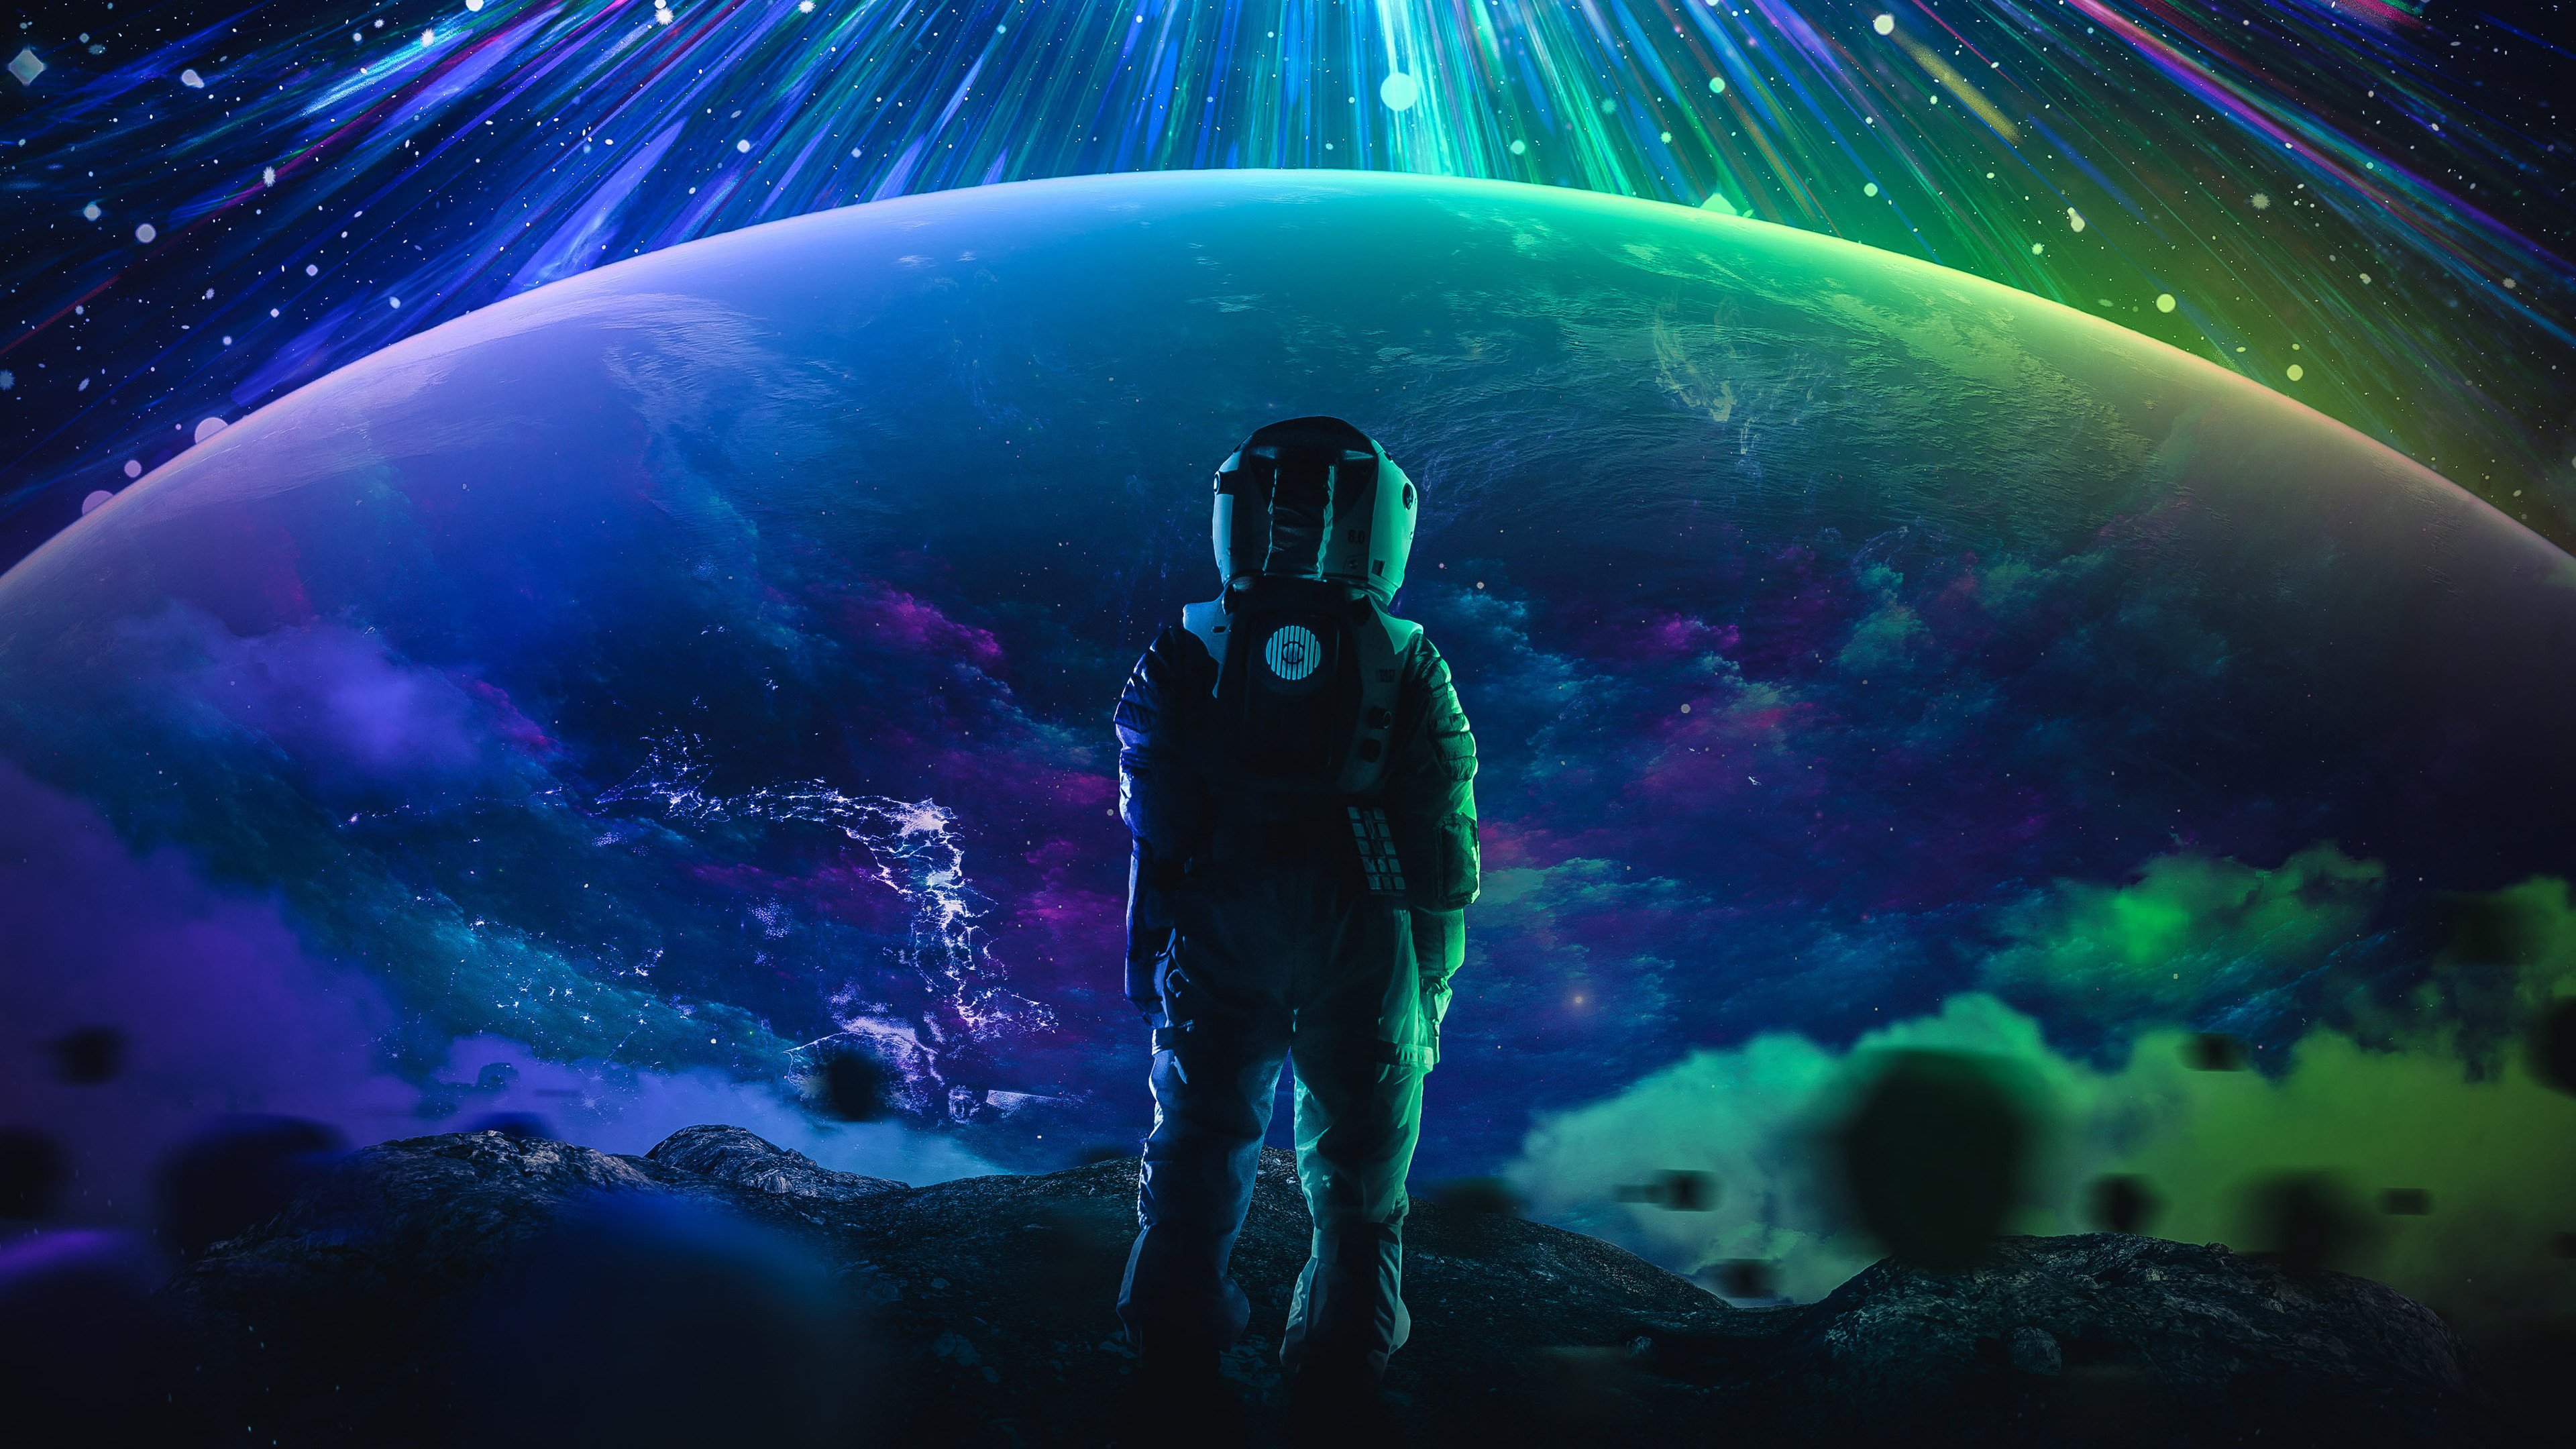 Wallpaper Astronaut looking at the sky